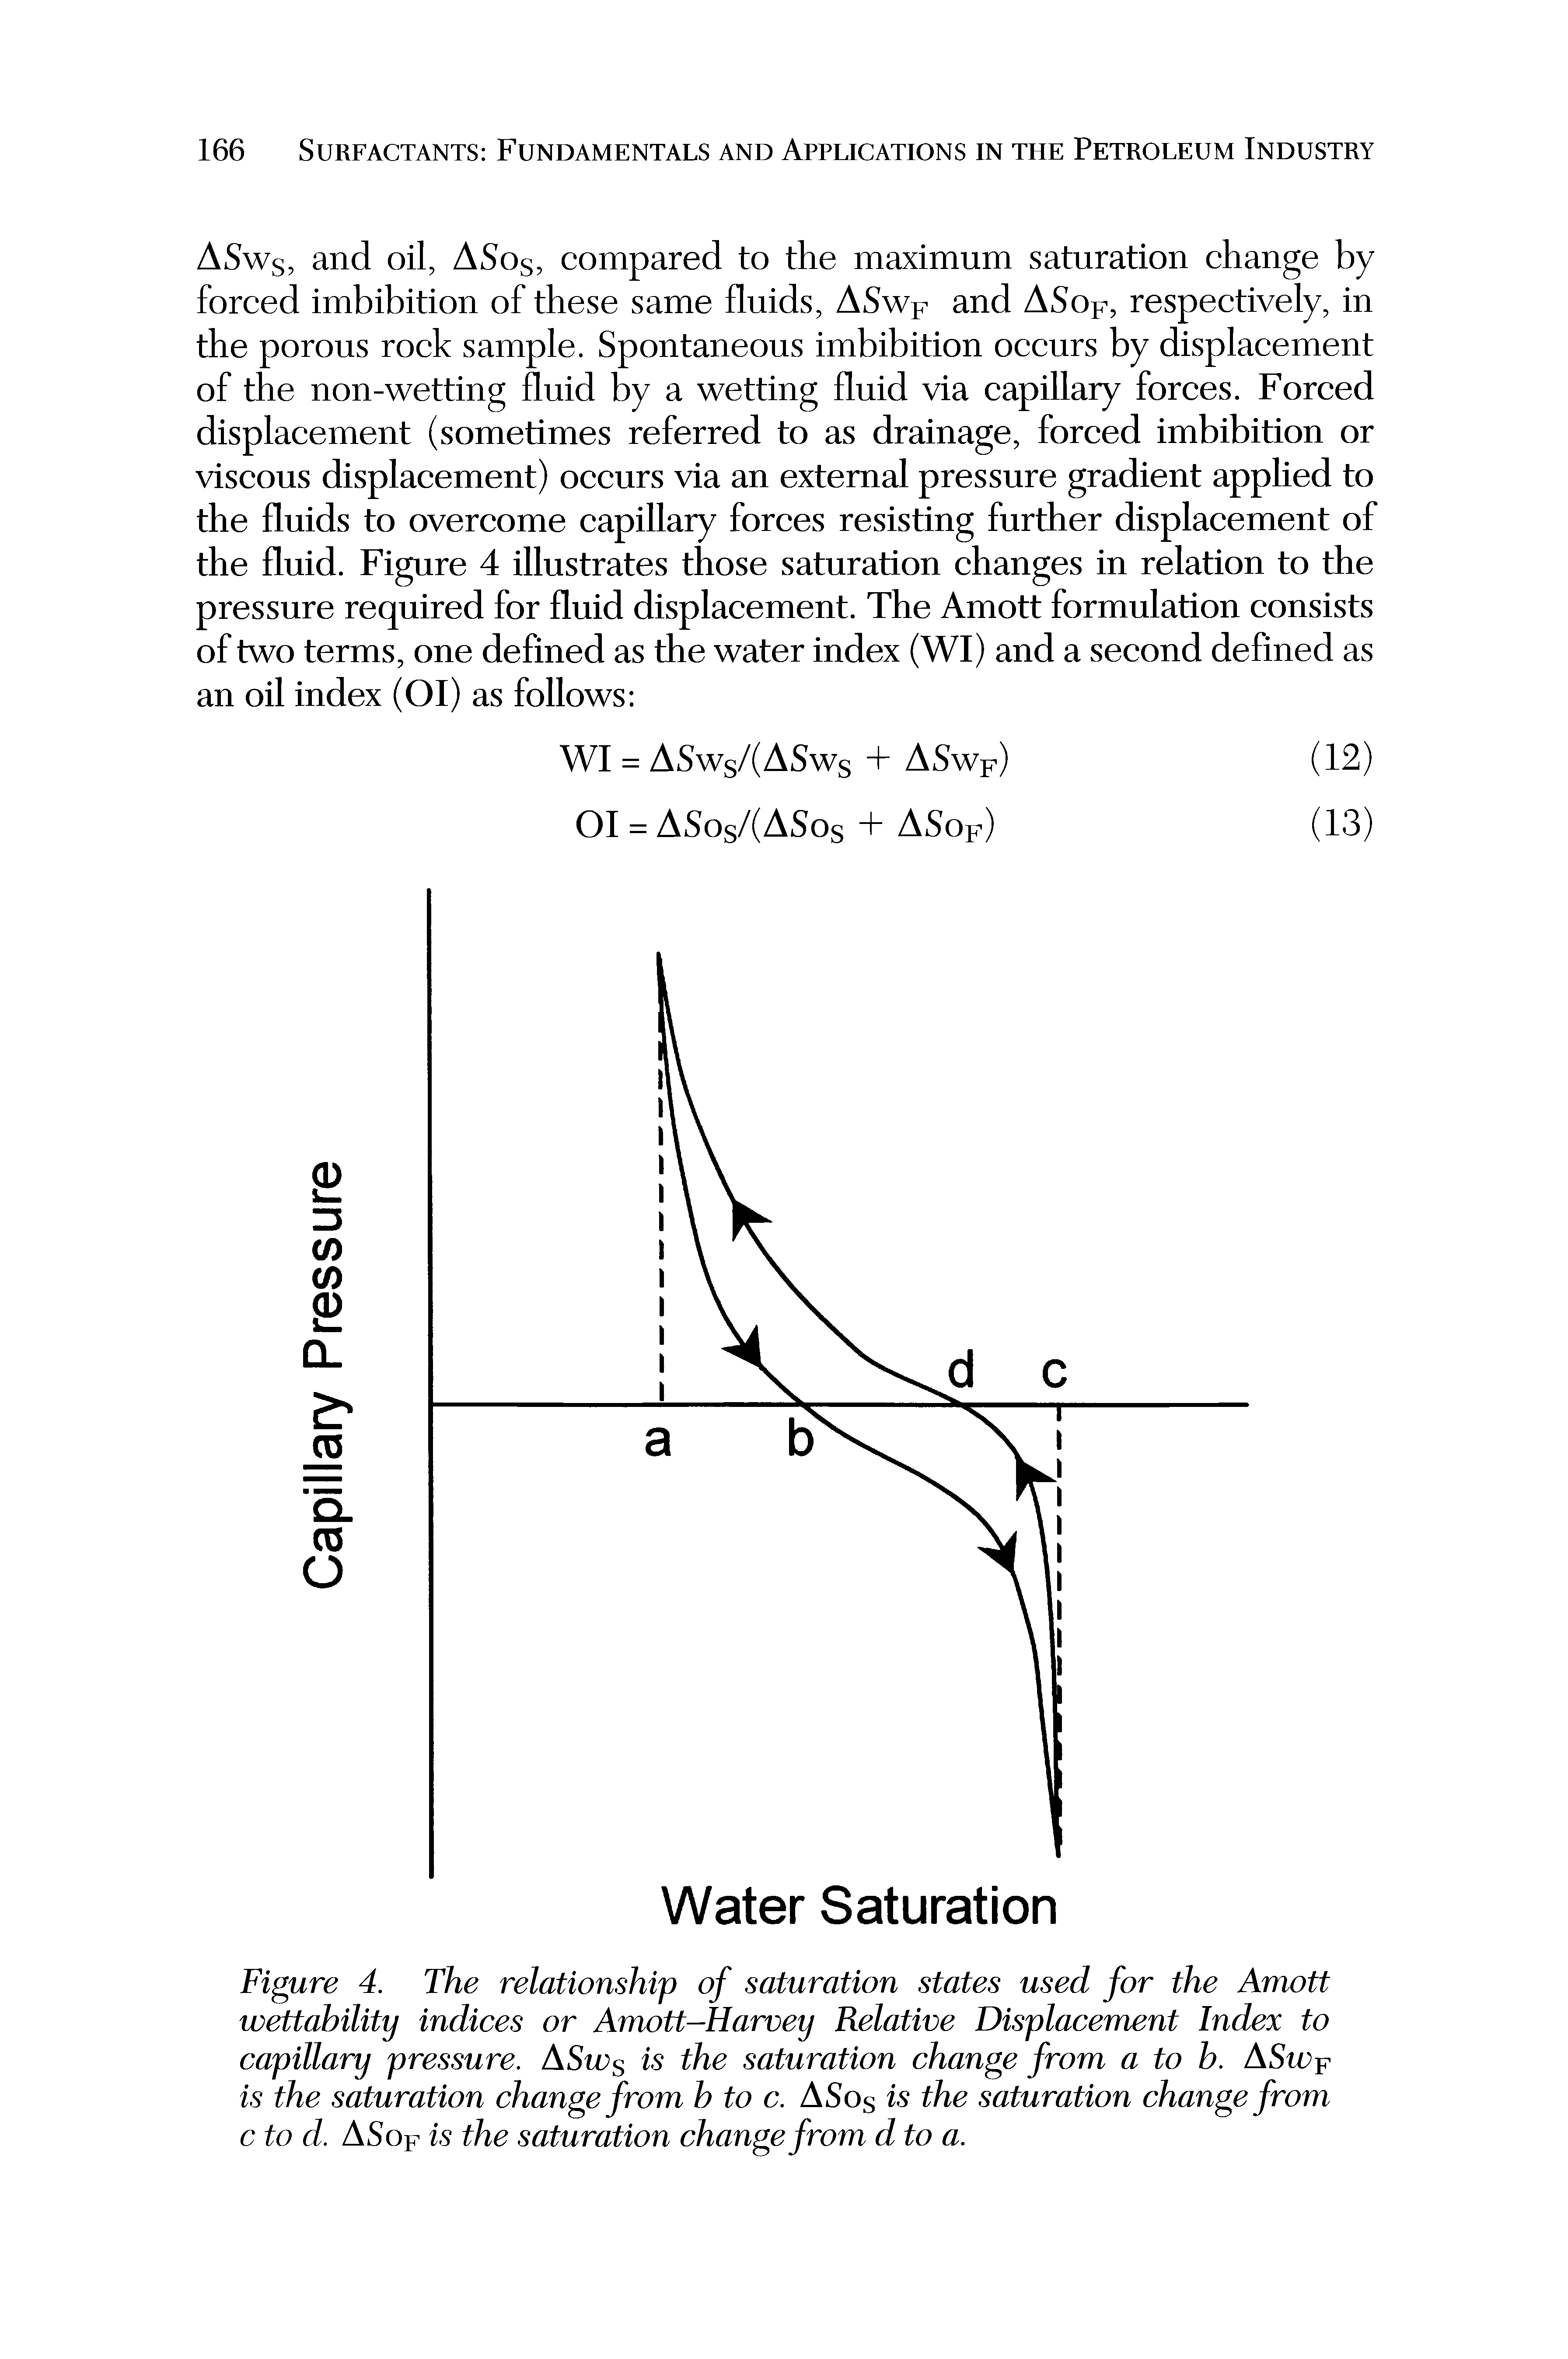 Figure 4. The relationship of saturation states used for the Amott wettability indices or Amott-Harvey Relative Displacement Index to capillary pressure. ASws is the saturation change from a to b. ASw is the saturation change from b to c. ASos is the saturation change from c to d. ASof is the saturation change from d to a.